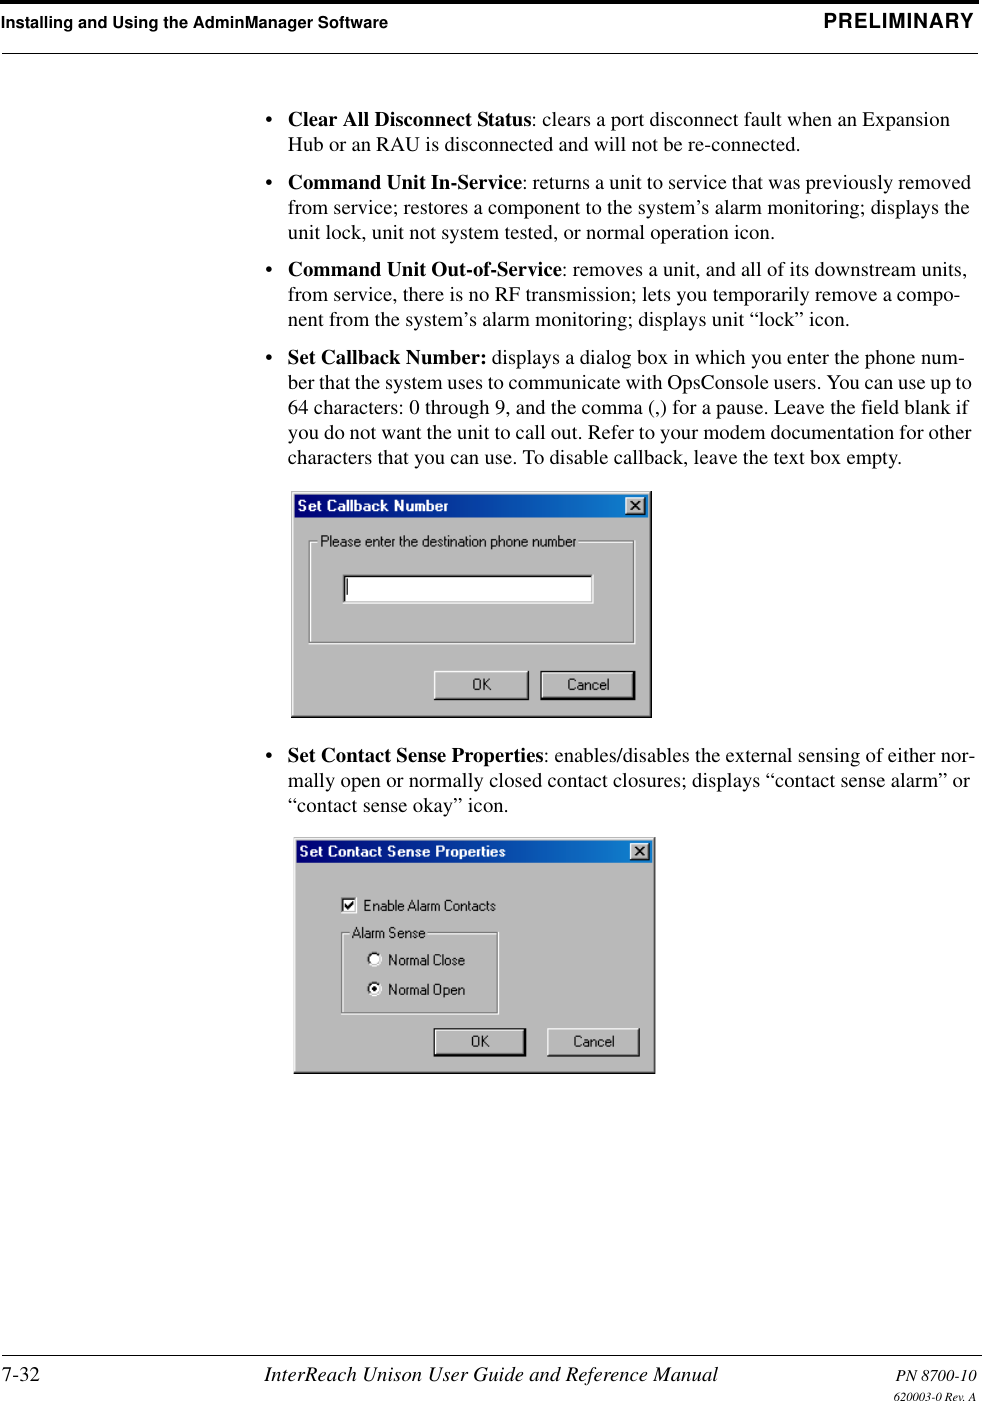 Installing and Using the AdminManager Software PRELIMINARY7-32 InterReach Unison User Guide and Reference Manual PN 8700-10620003-0 Rev. A•Clear All Disconnect Status: clears a port disconnect fault when an Expansion Hub or an RAU is disconnected and will not be re-connected.•Command Unit In-Service: returns a unit to service that was previously removed from service; restores a component to the system’s alarm monitoring; displays the unit lock, unit not system tested, or normal operation icon.•Command Unit Out-of-Service: removes a unit, and all of its downstream units, from service, there is no RF transmission; lets you temporarily remove a compo-nent from the system’s alarm monitoring; displays unit “lock” icon.•Set Callback Number: displays a dialog box in which you enter the phone num-ber that the system uses to communicate with OpsConsole users. You can use up to 64 characters: 0 through 9, and the comma (,) for a pause. Leave the field blank if you do not want the unit to call out. Refer to your modem documentation for other characters that you can use. To disable callback, leave the text box empty.•Set Contact Sense Properties: enables/disables the external sensing of either nor-mally open or normally closed contact closures; displays “contact sense alarm” or “contact sense okay” icon.